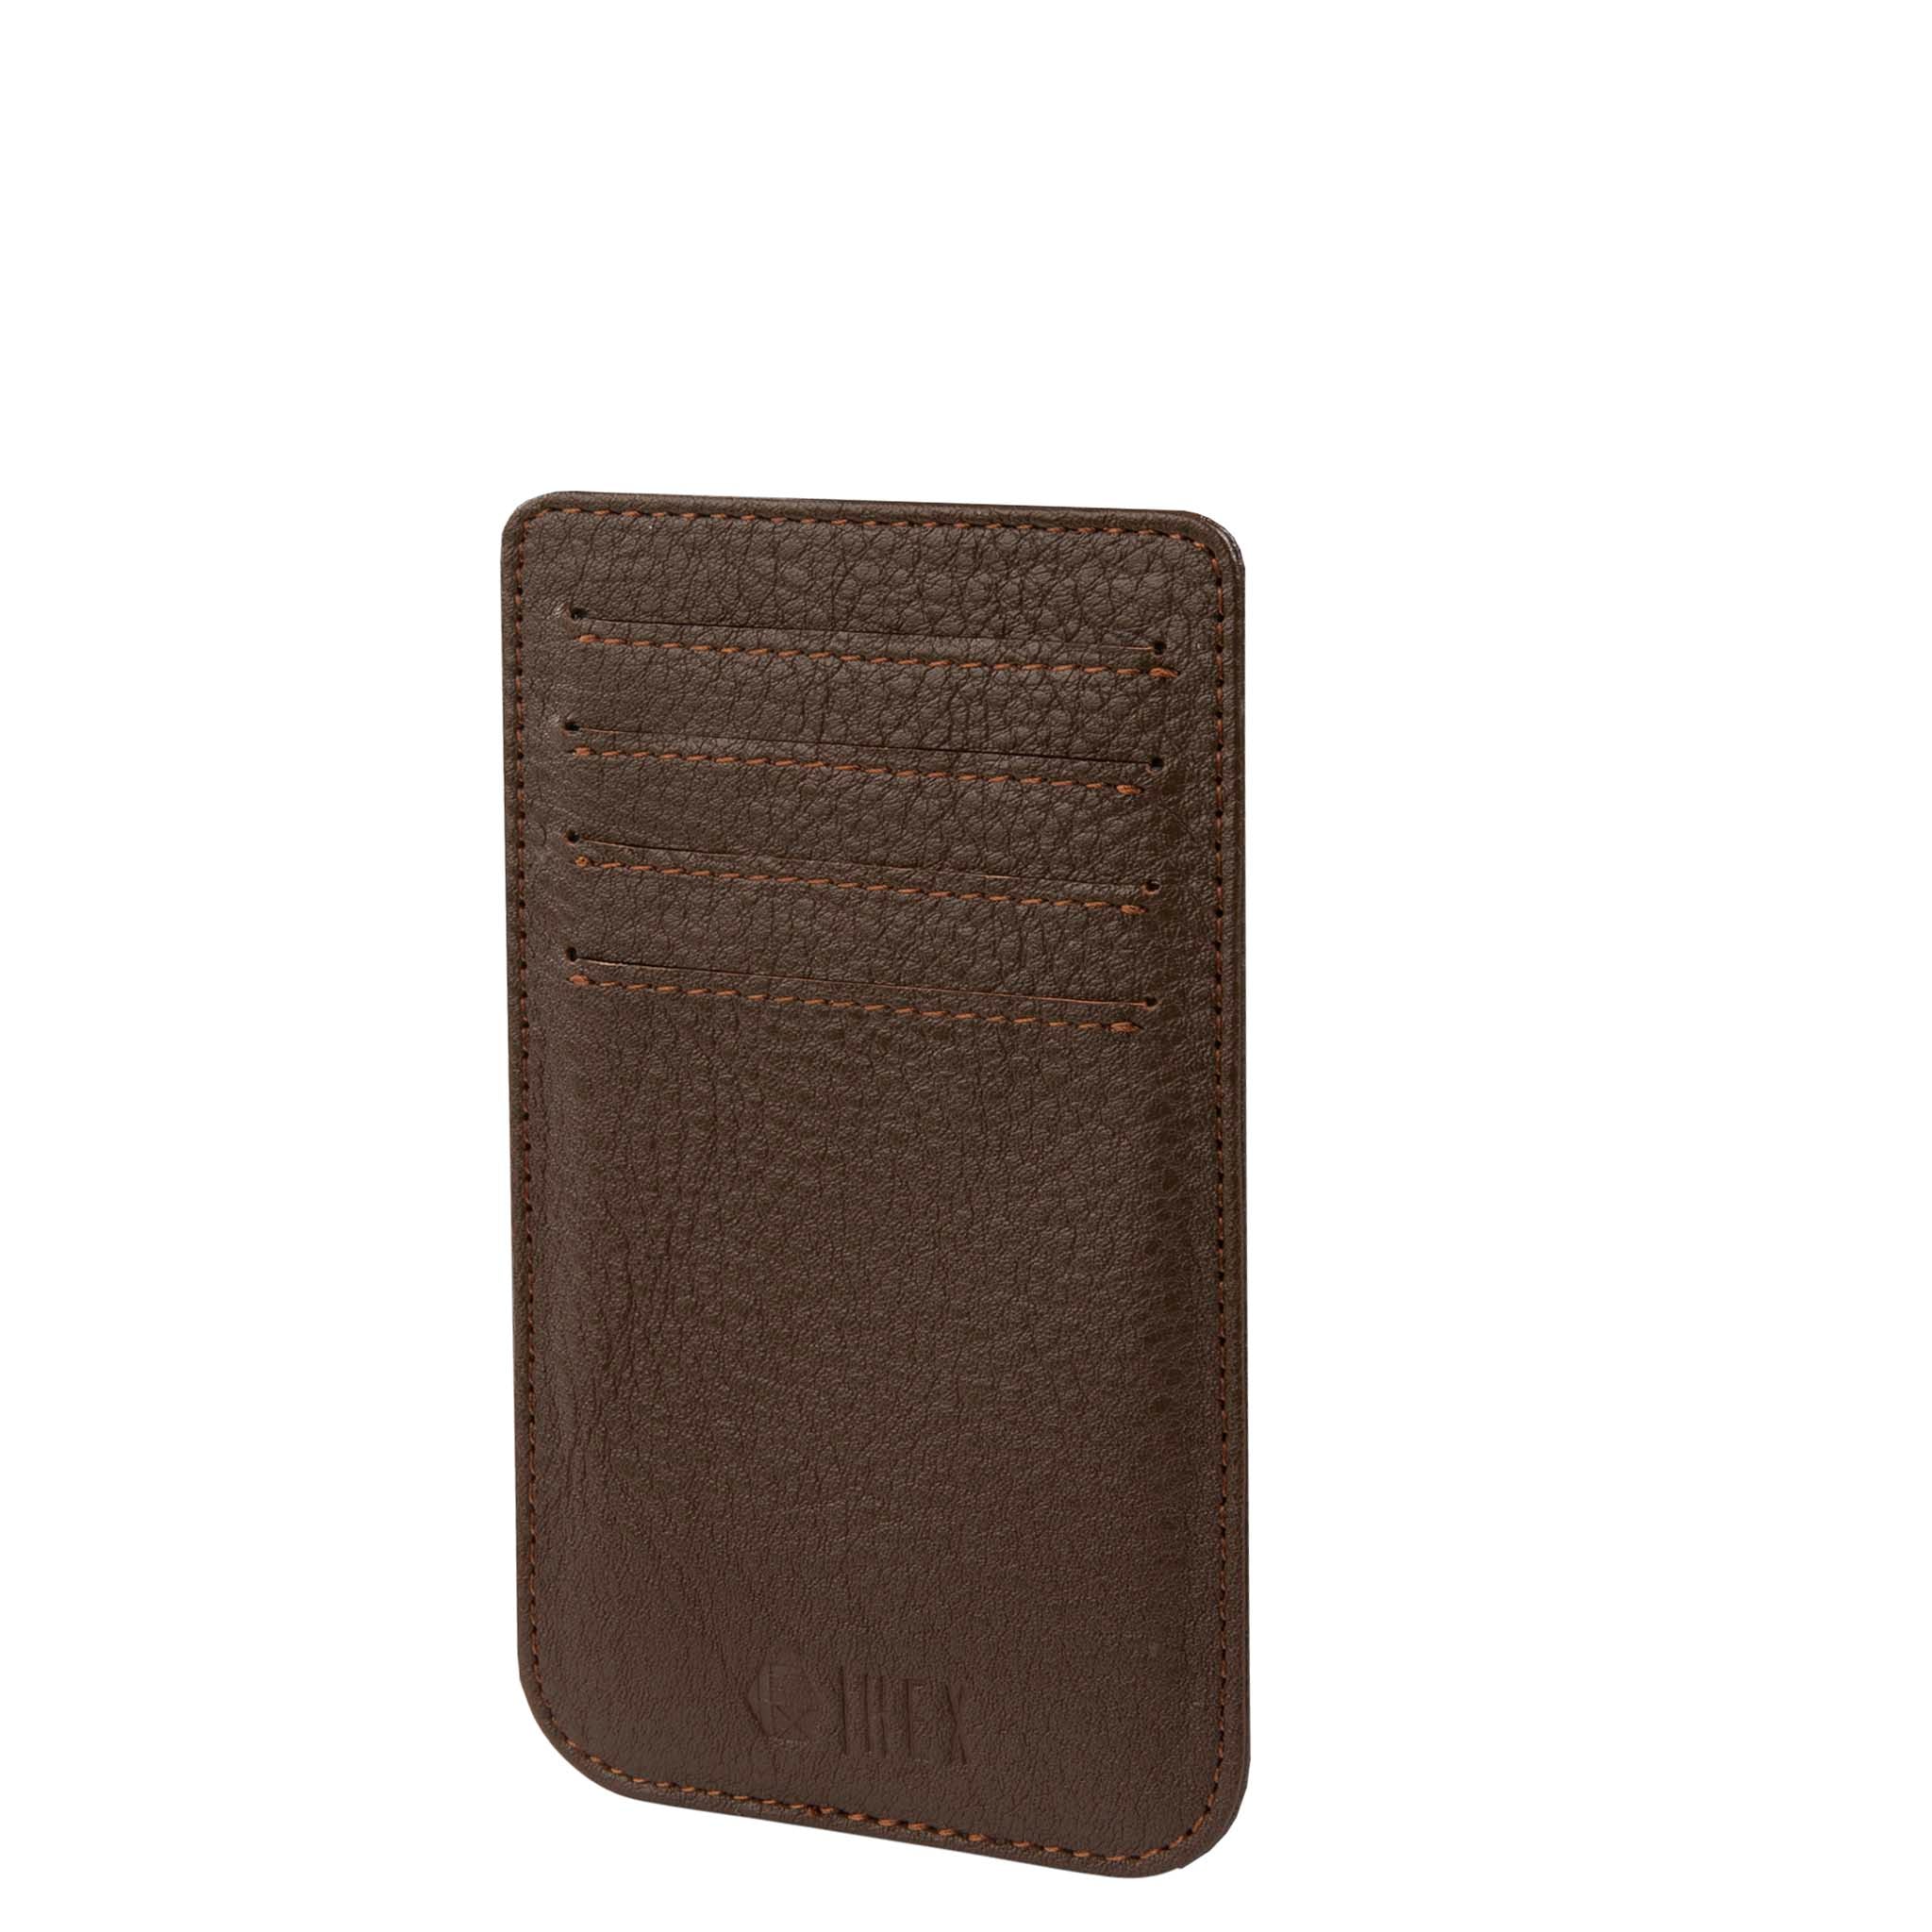 Brown Leather 4 In 1 Case For Iphone 11 Pro Max Hex Brand Hex